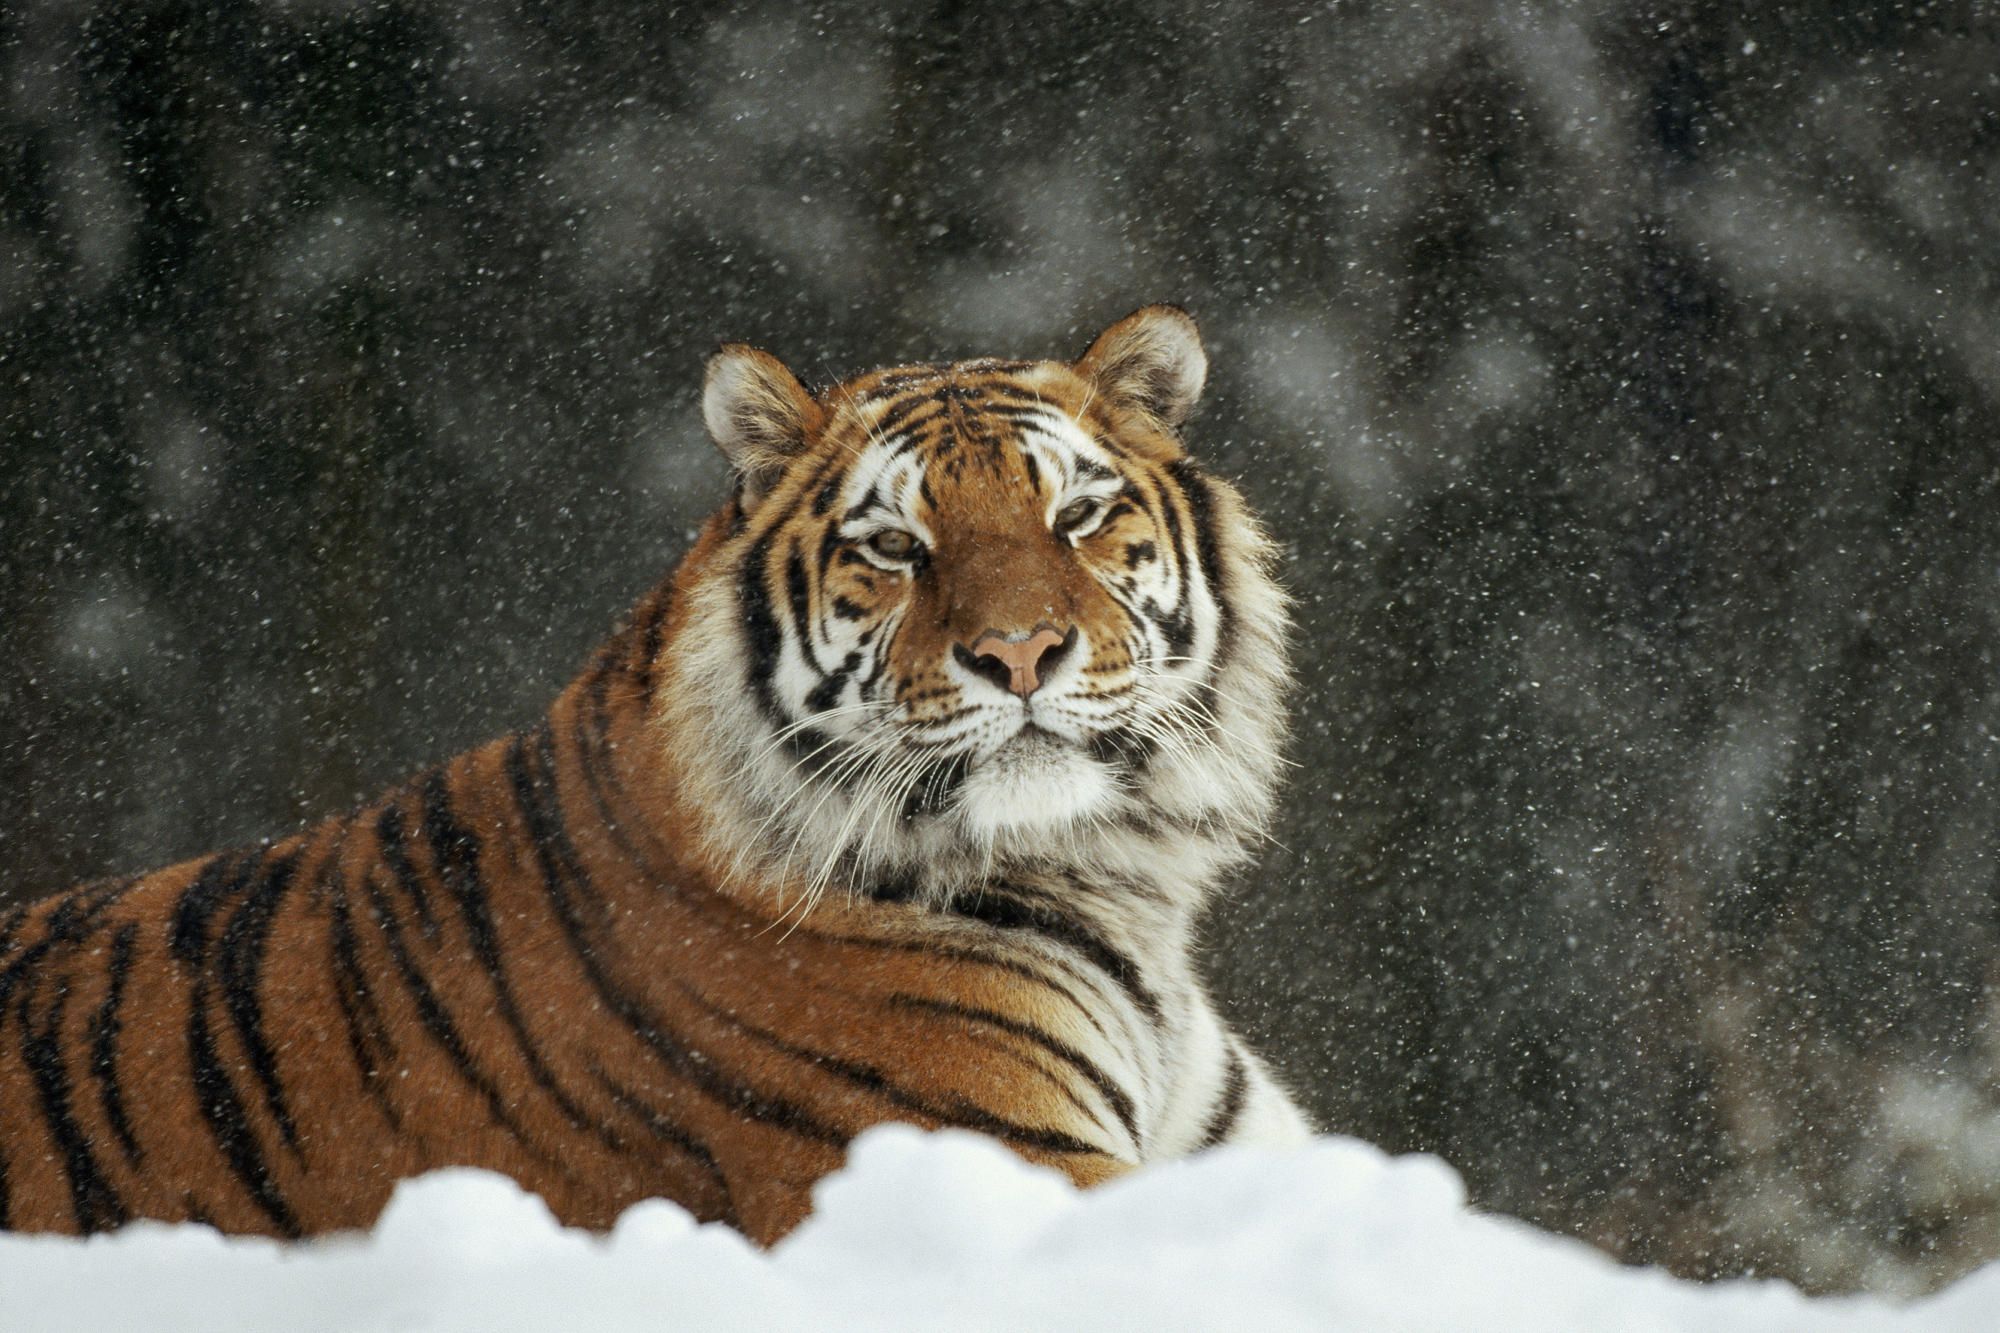 Animals snow tigers wallpaper - (#173558) - High Quality and ...